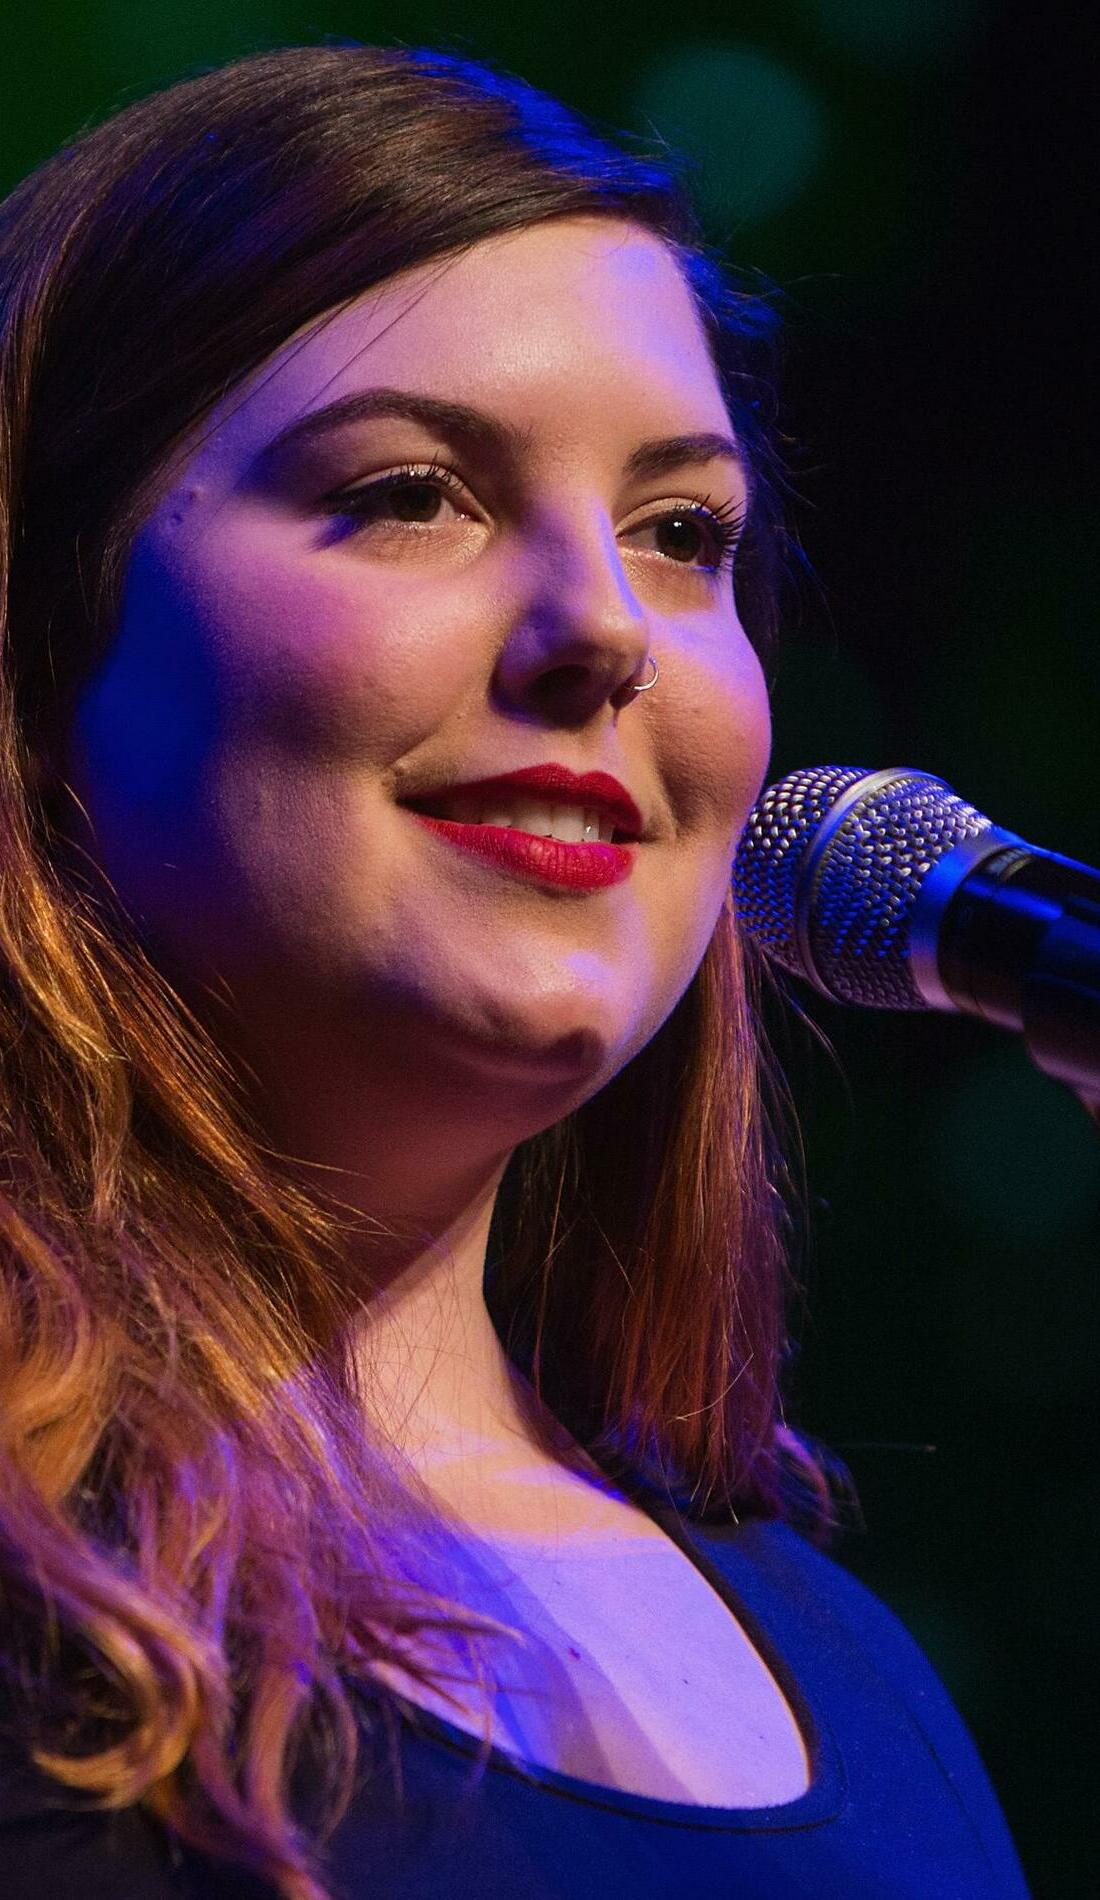 A Mary Lambert live event